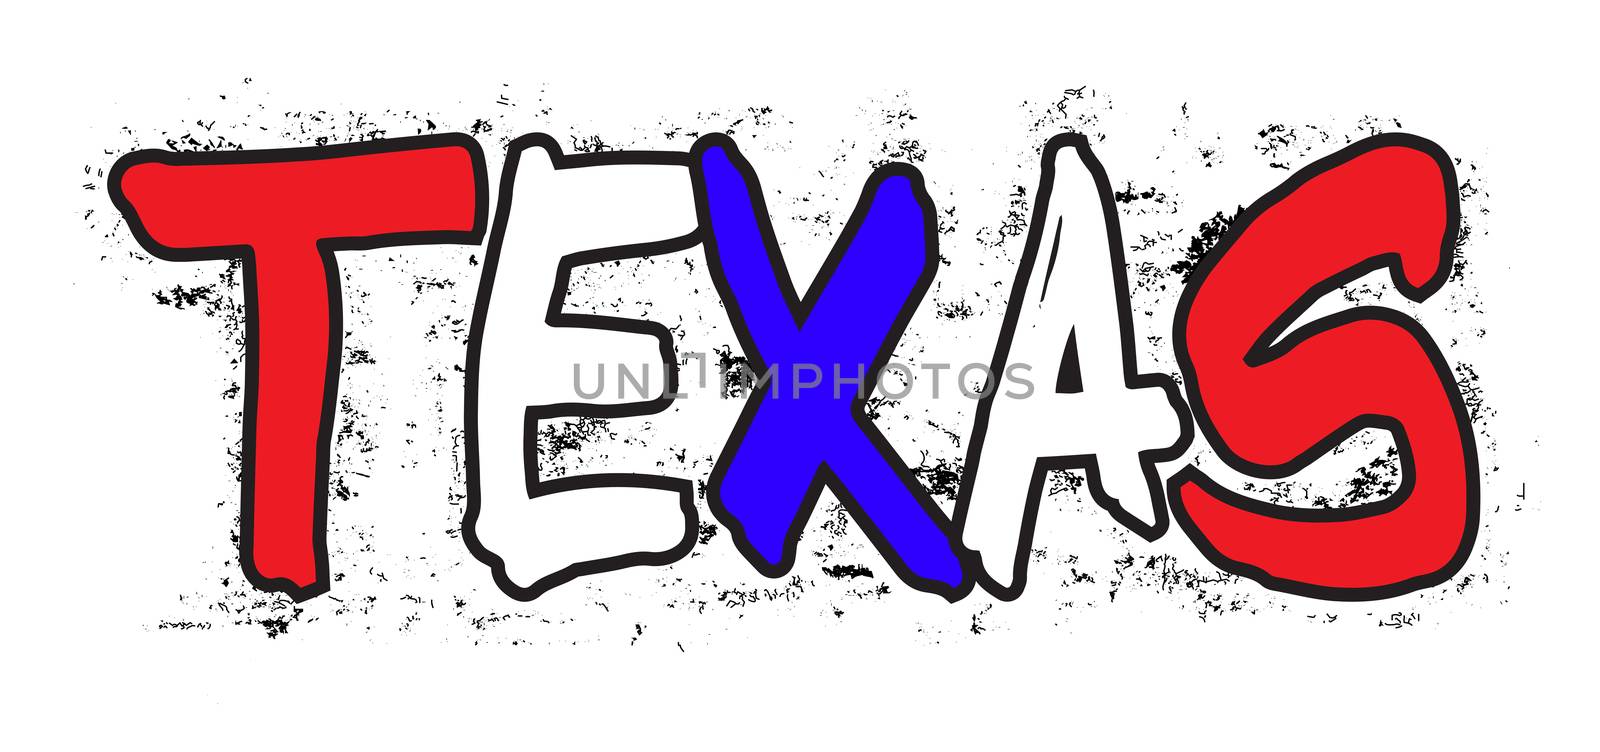 The word TEXAS sprayed onto a wall in red white and blue with a white background